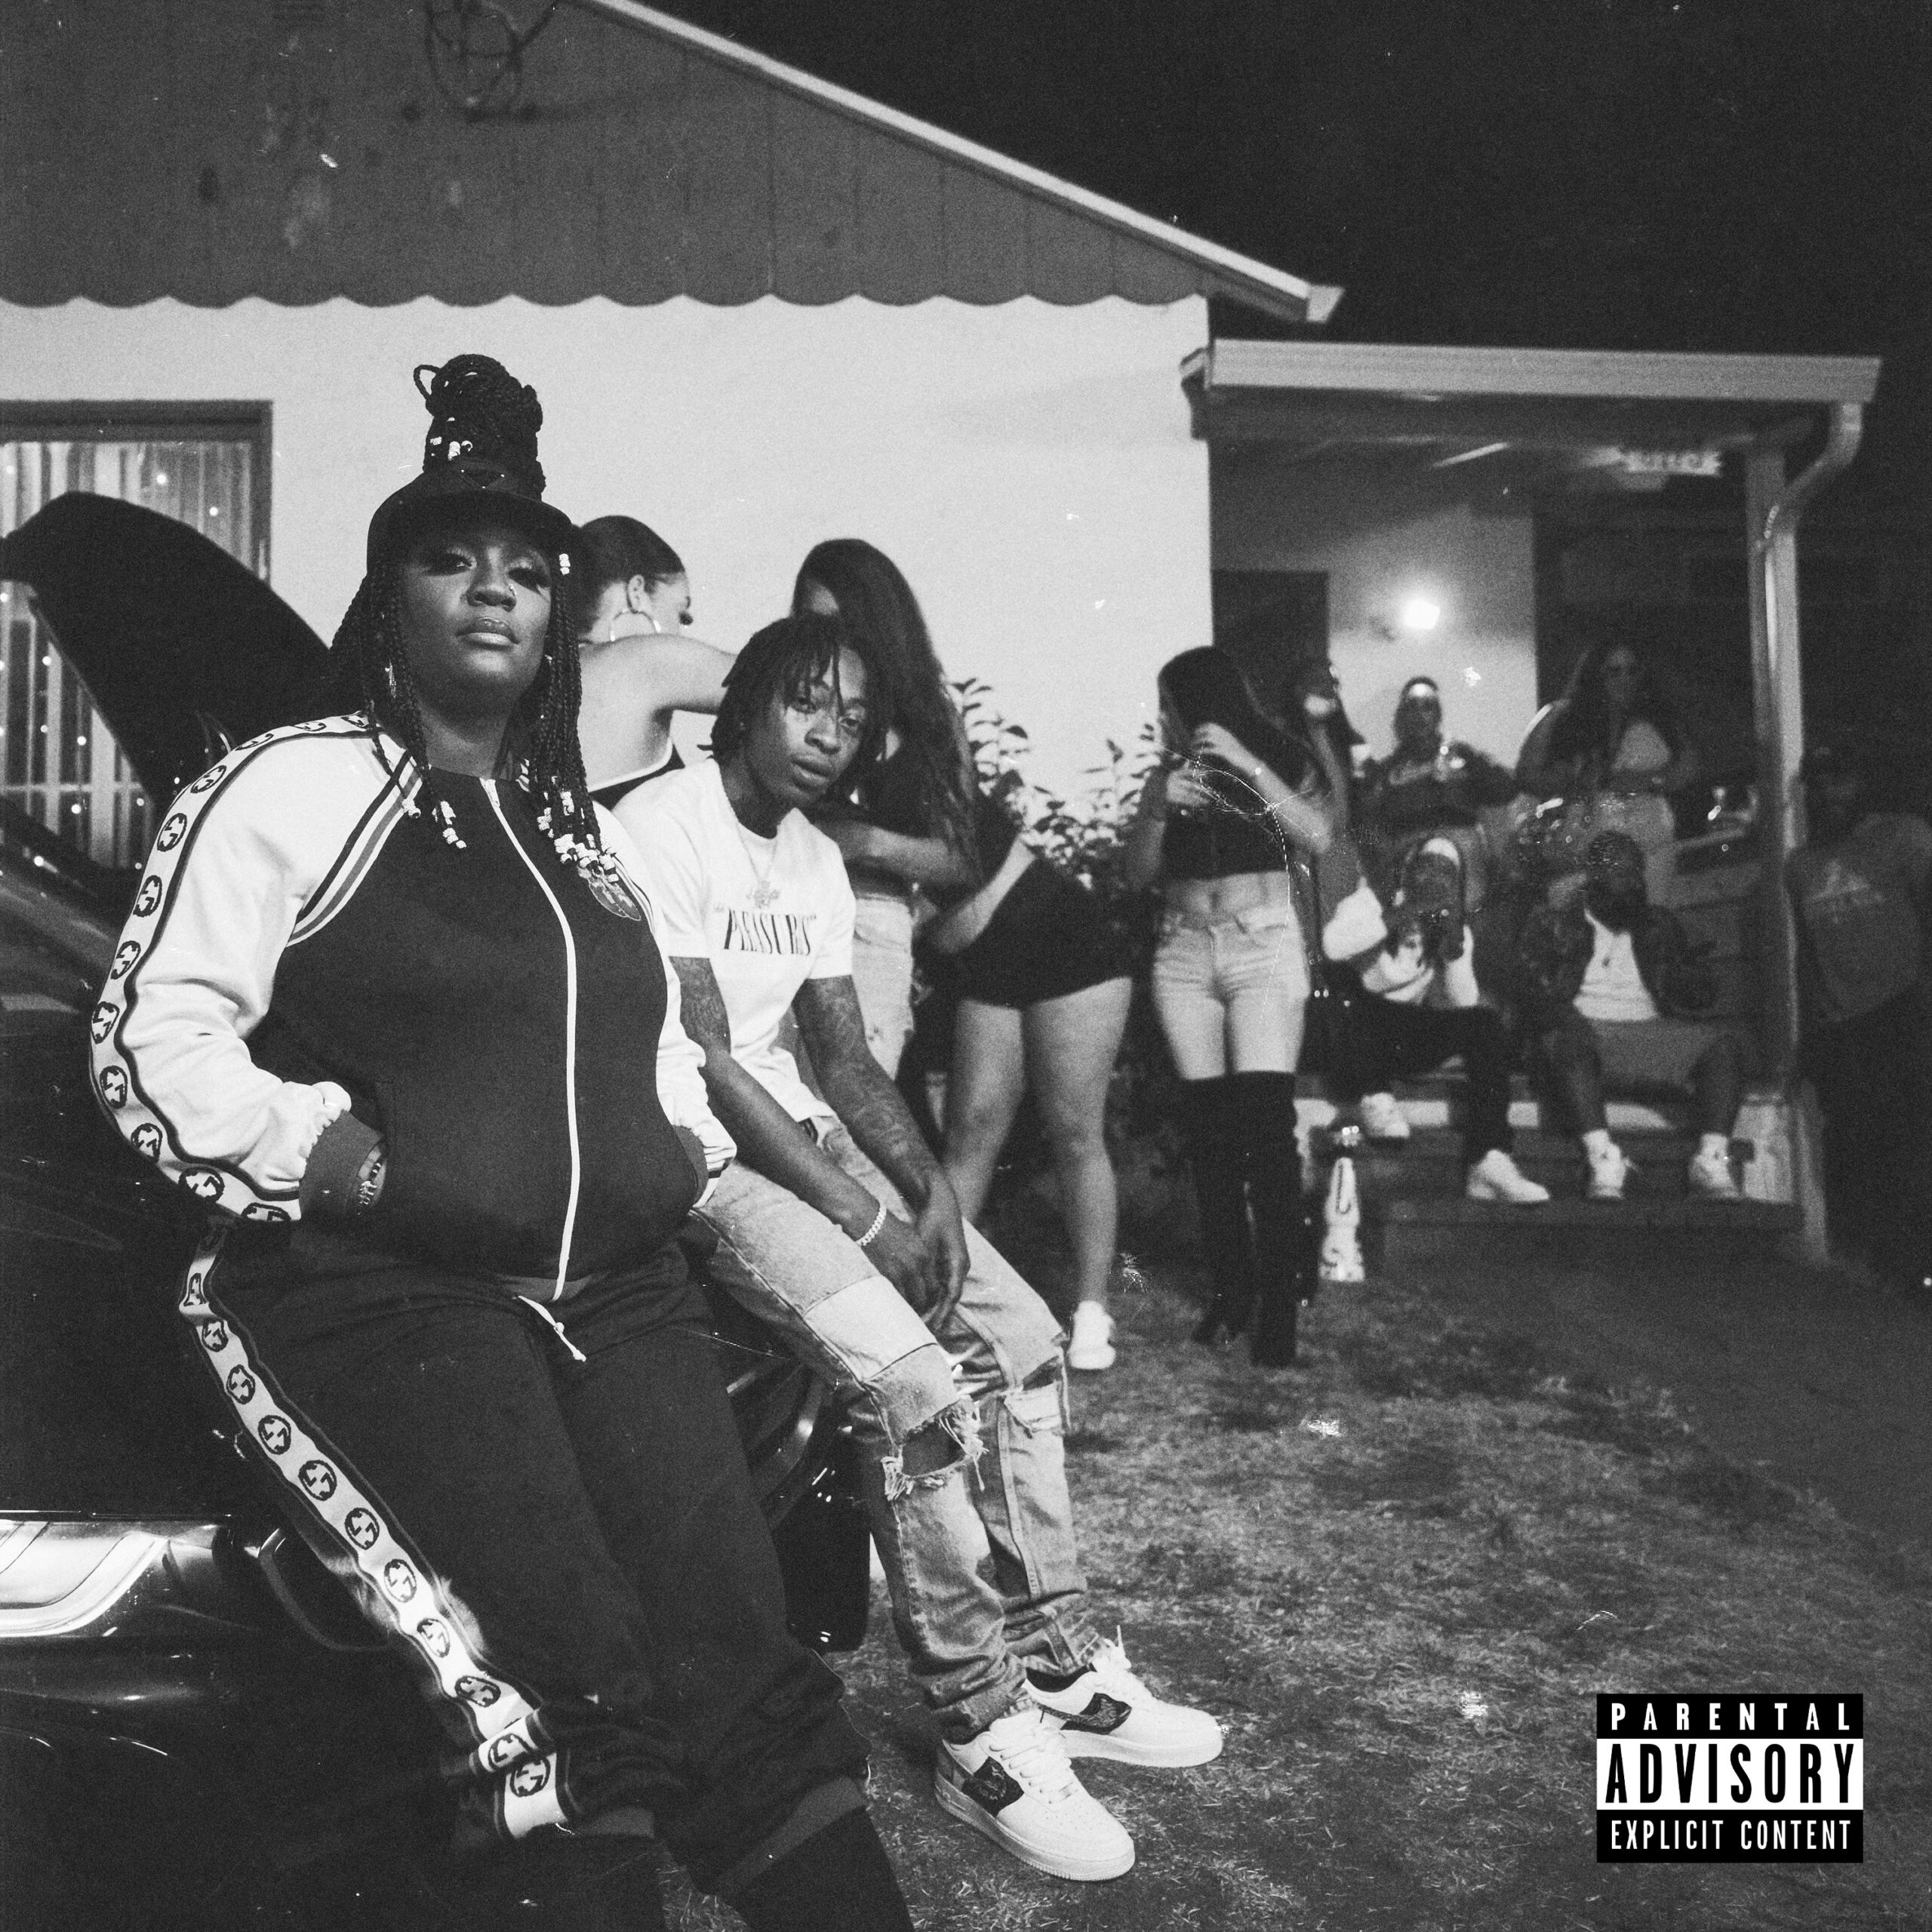 Kamaiyah and Capolow Team Up For “Oakland Nights” Album